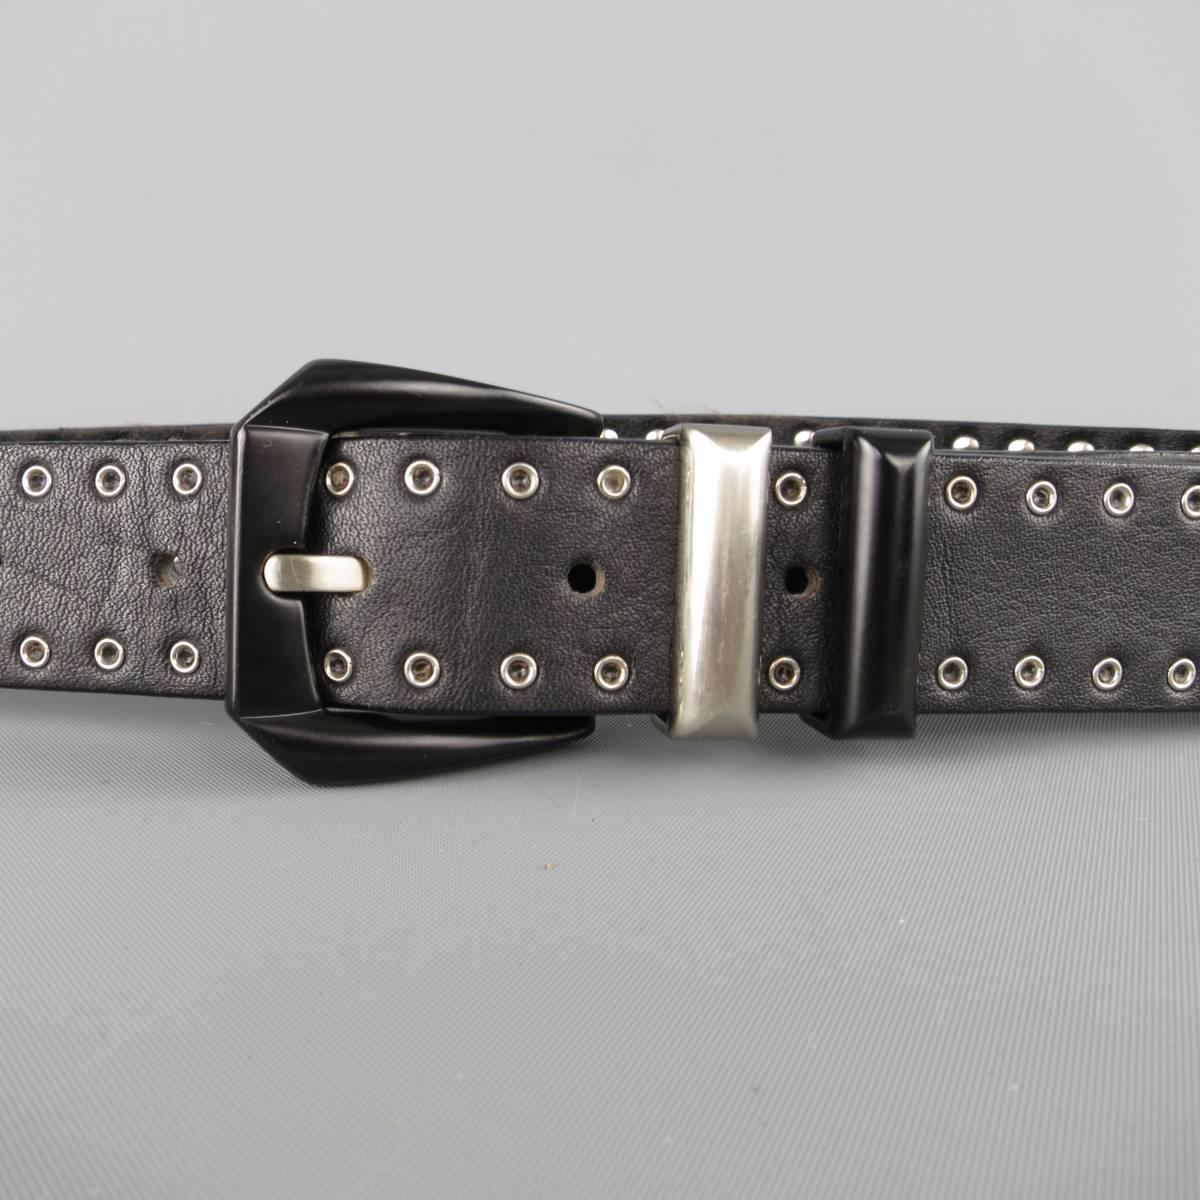 Vintage 1990's GIANNI VERSACE statement belt features a black leather small grommet studded strap with silver tone Medusa studs, matte black metal Western buckle, and silver tone metal cutout panels with black Medusa motifs. Made in Italy.
